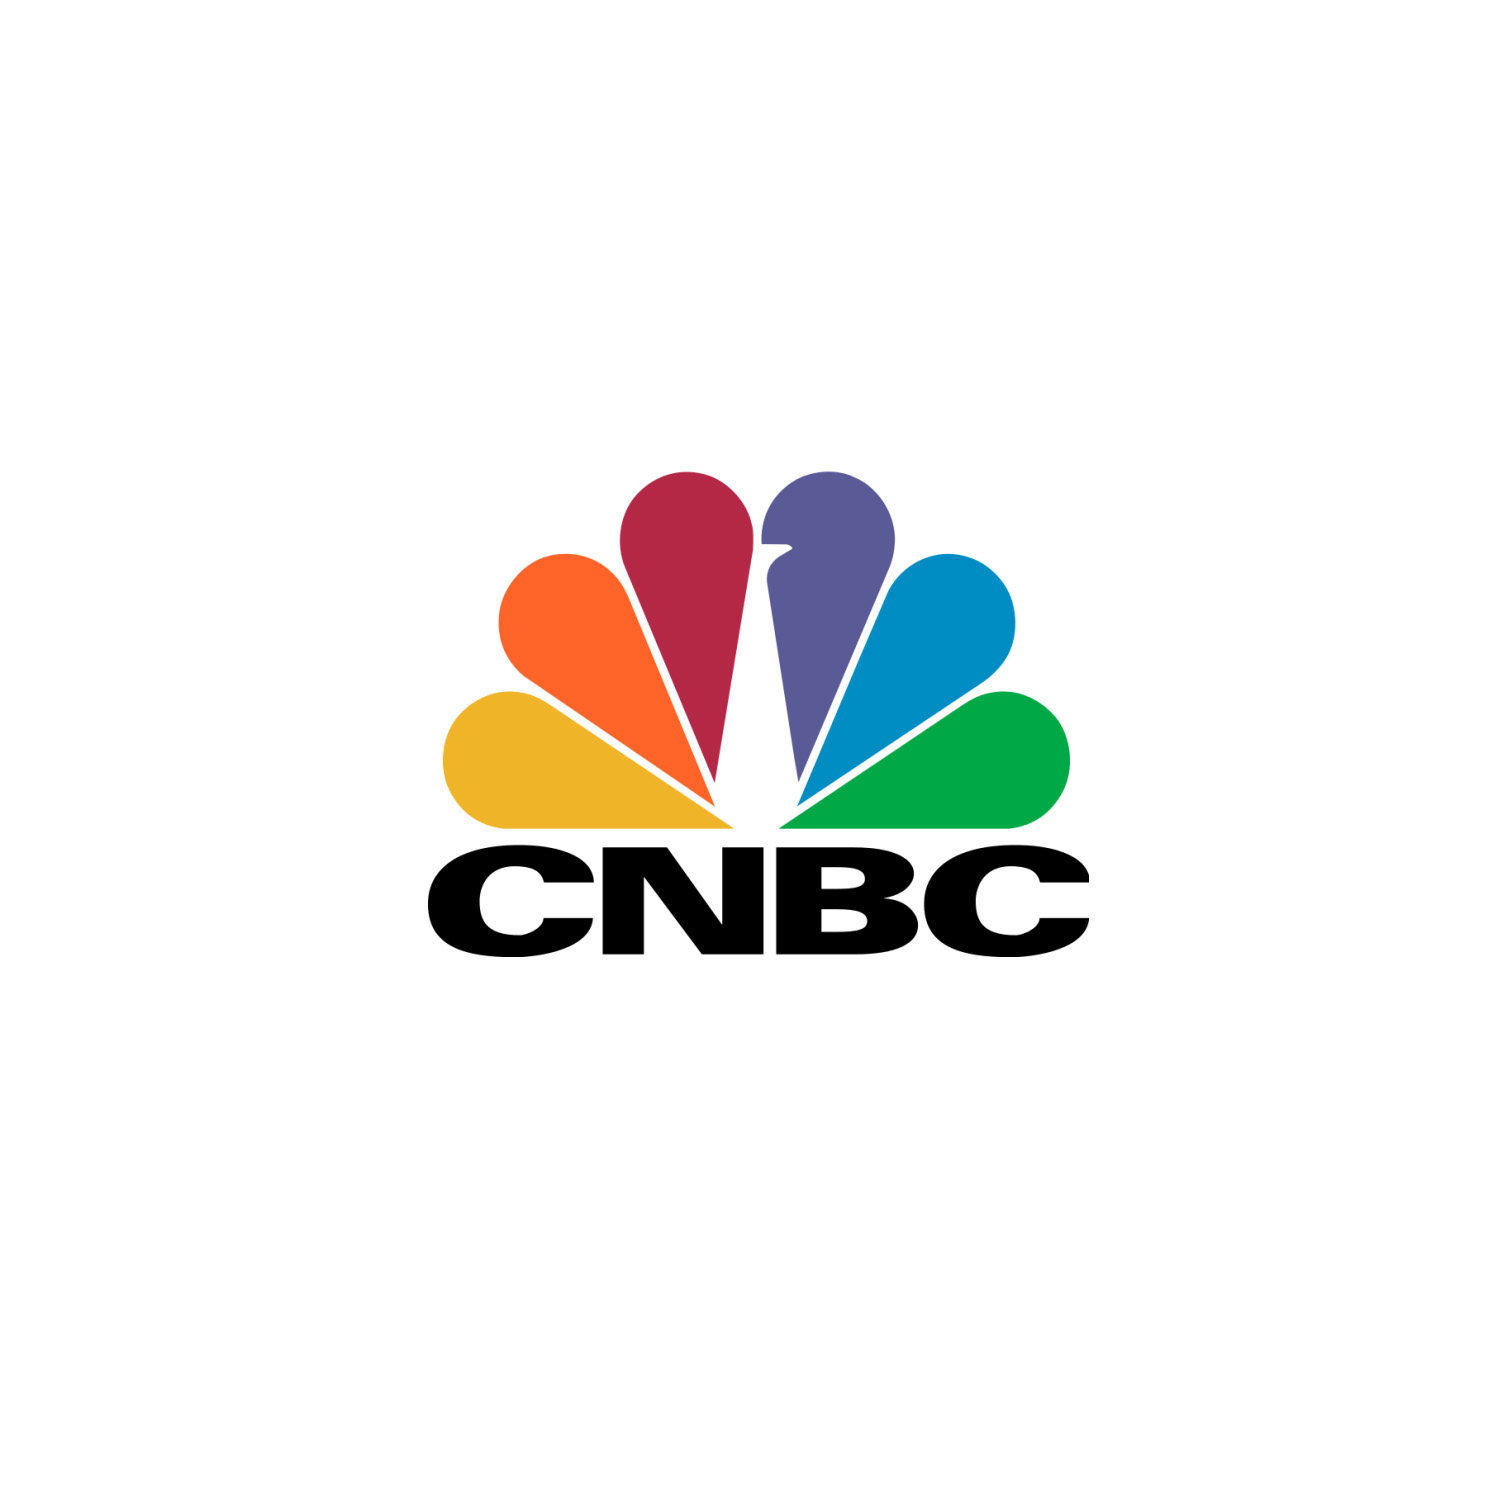 Cnbc com. CNBC logo. CNBC News logo. CNBC. CNBC logo PNG.